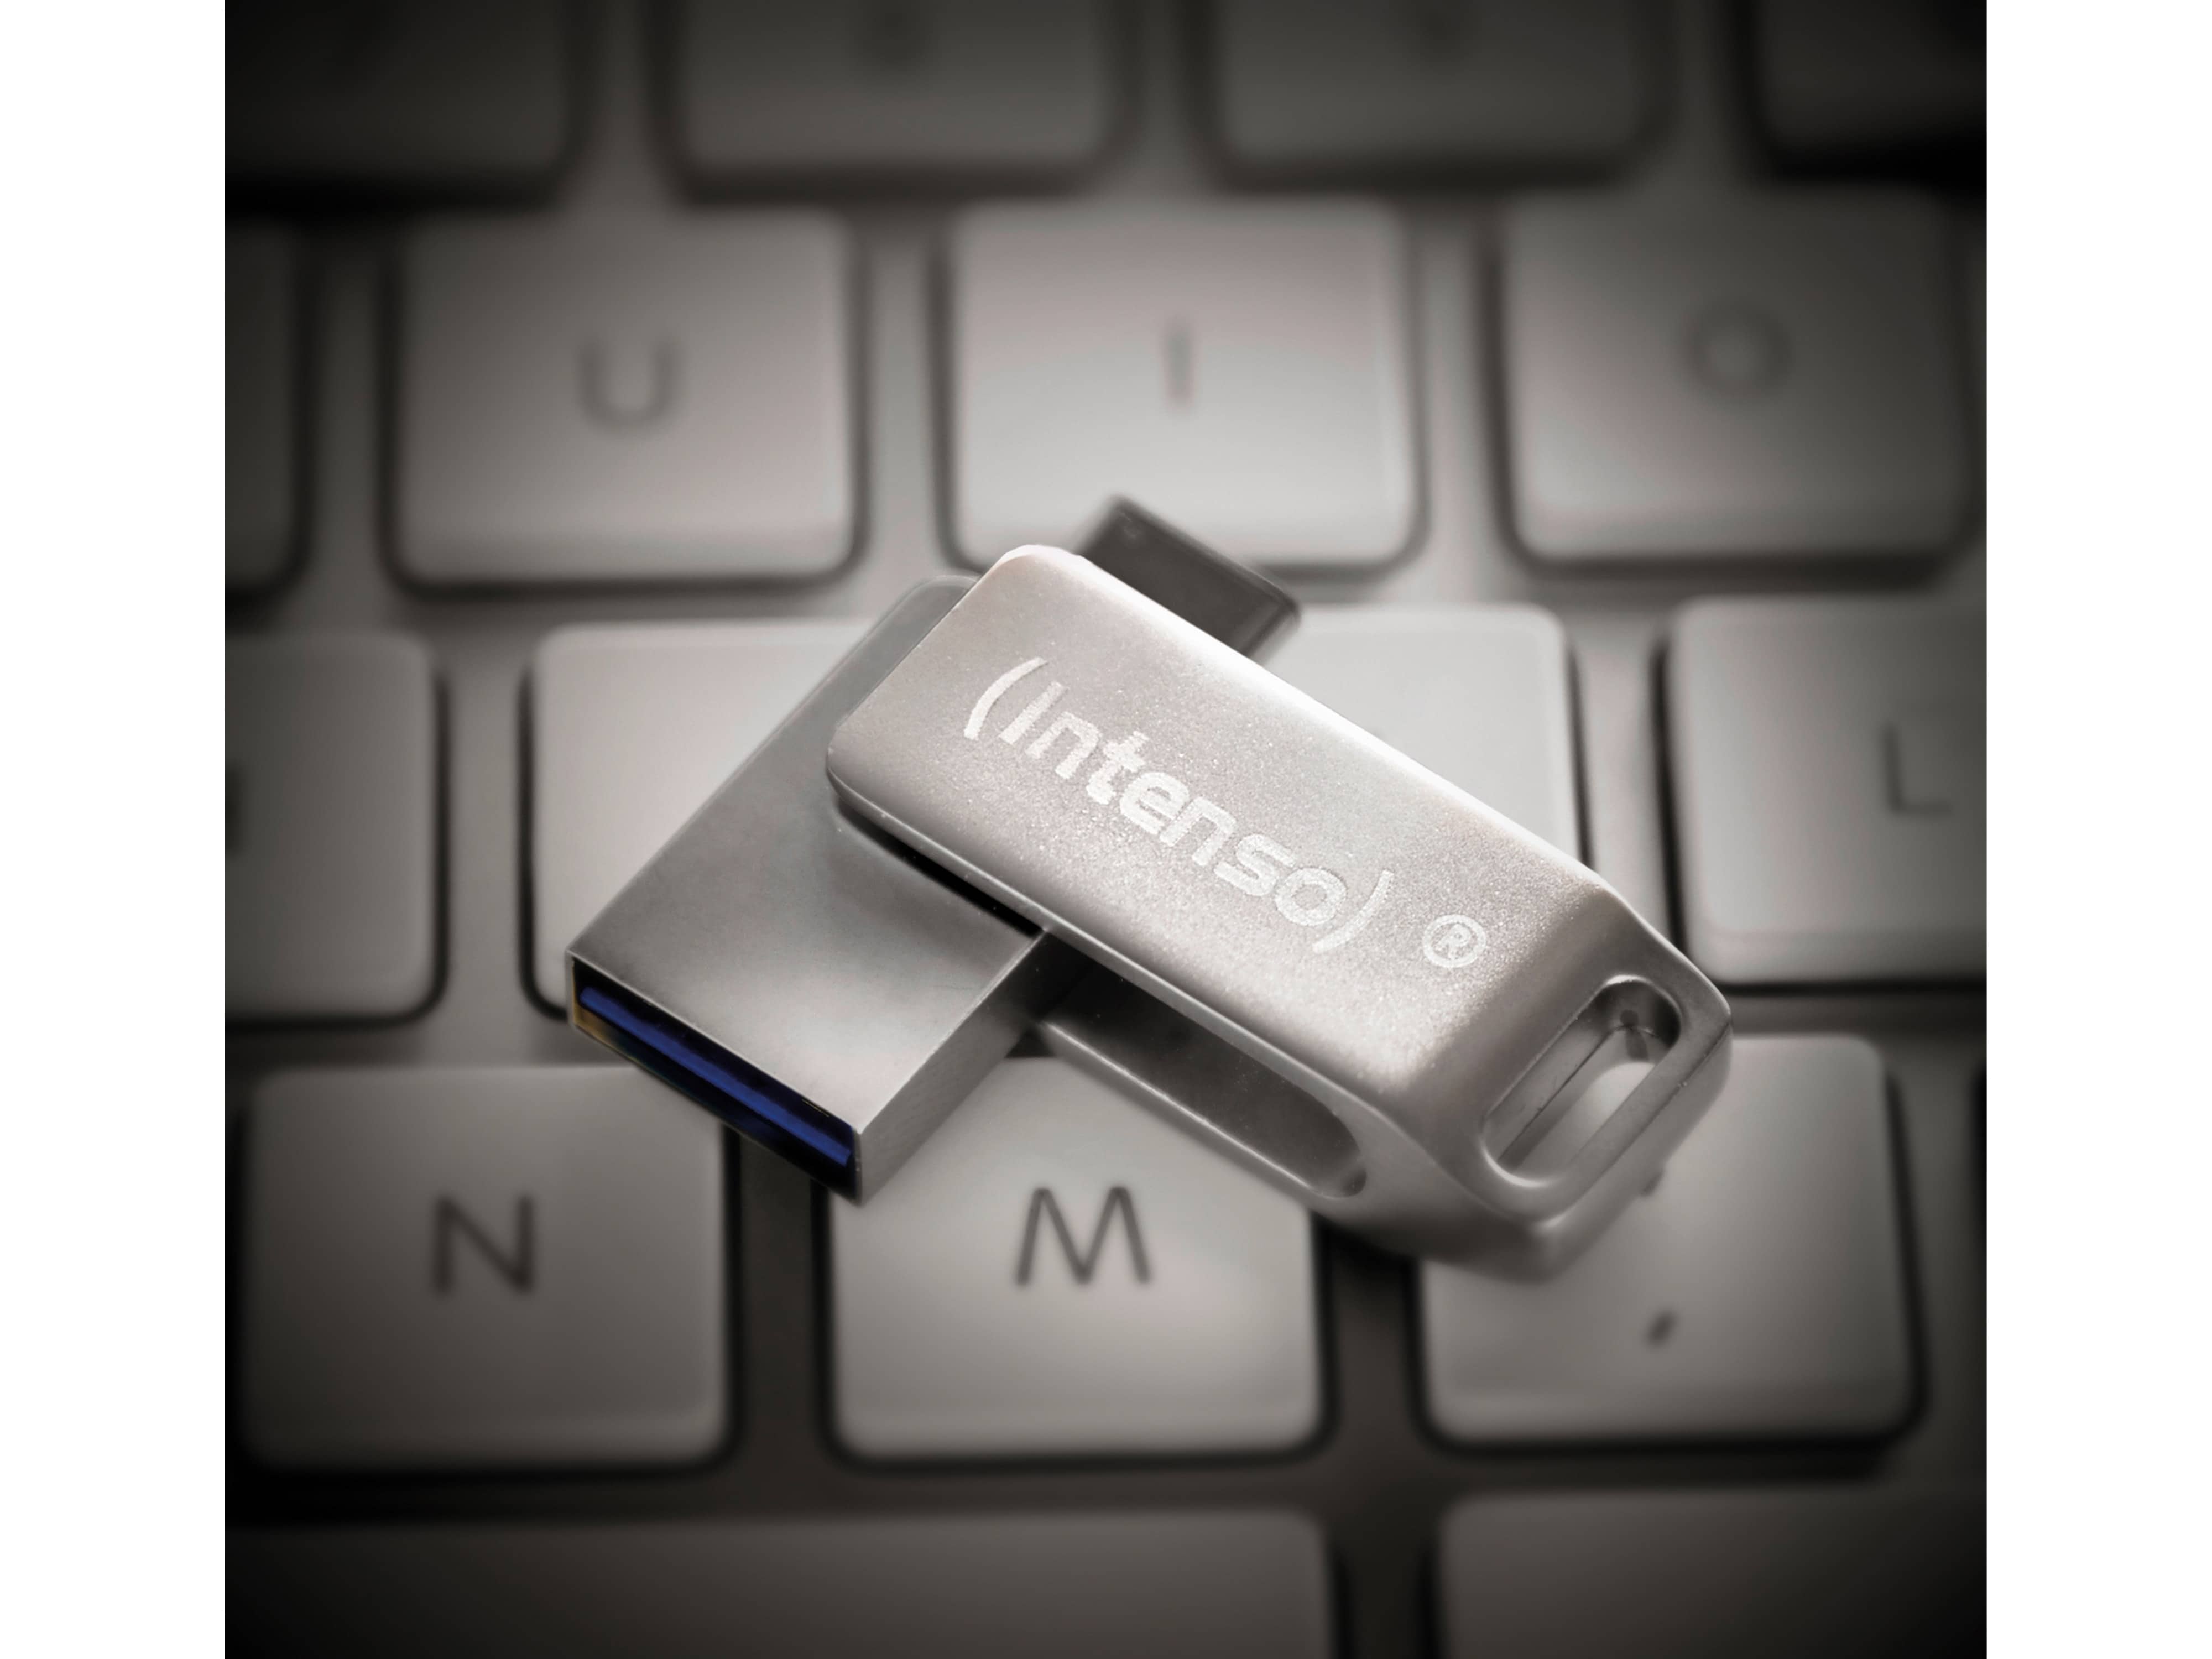 INTENSO USB 3.2 cMobile Line, 128 GB, silber